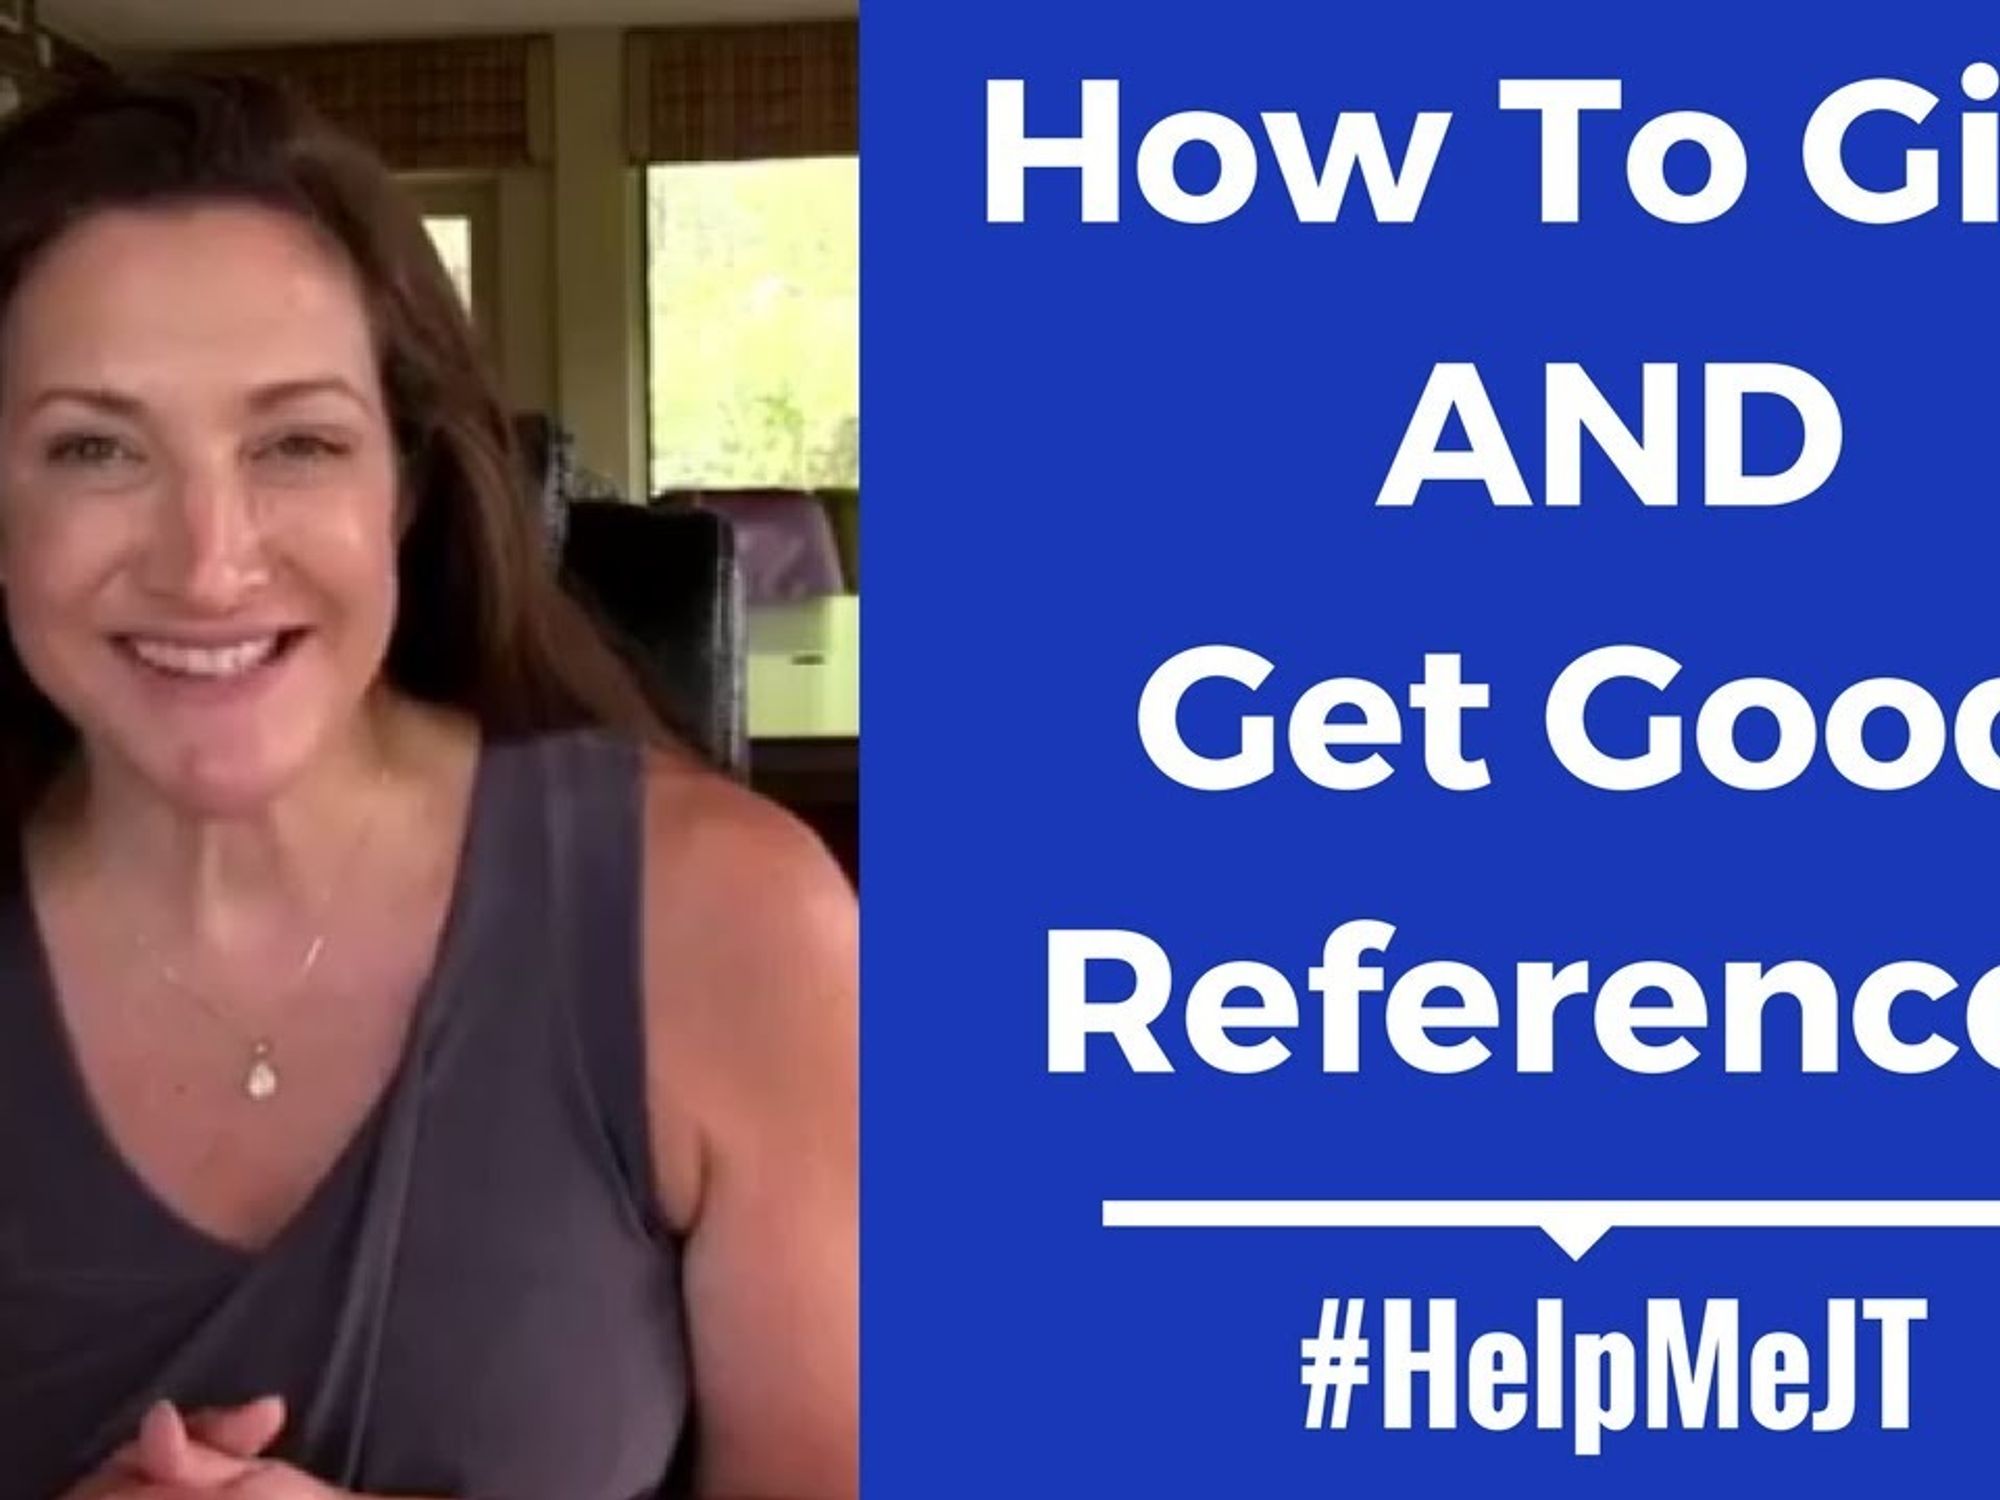 4 Ways To Give AND Get Good Professional References